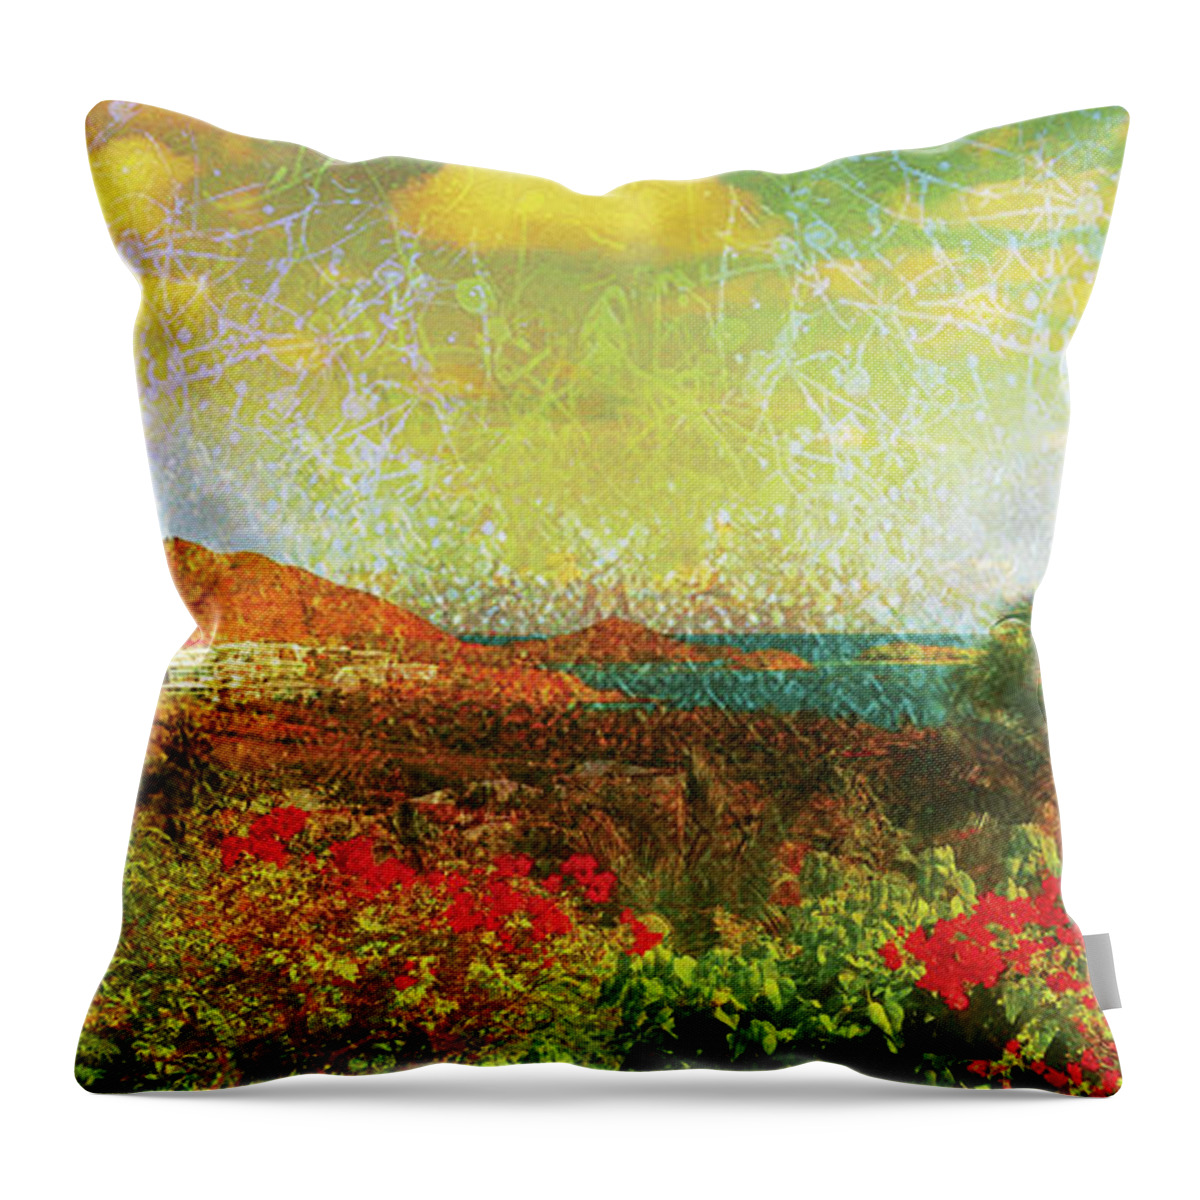 #creativemother Throw Pillow featuring the digital art Fantastico by Francelle Theriot